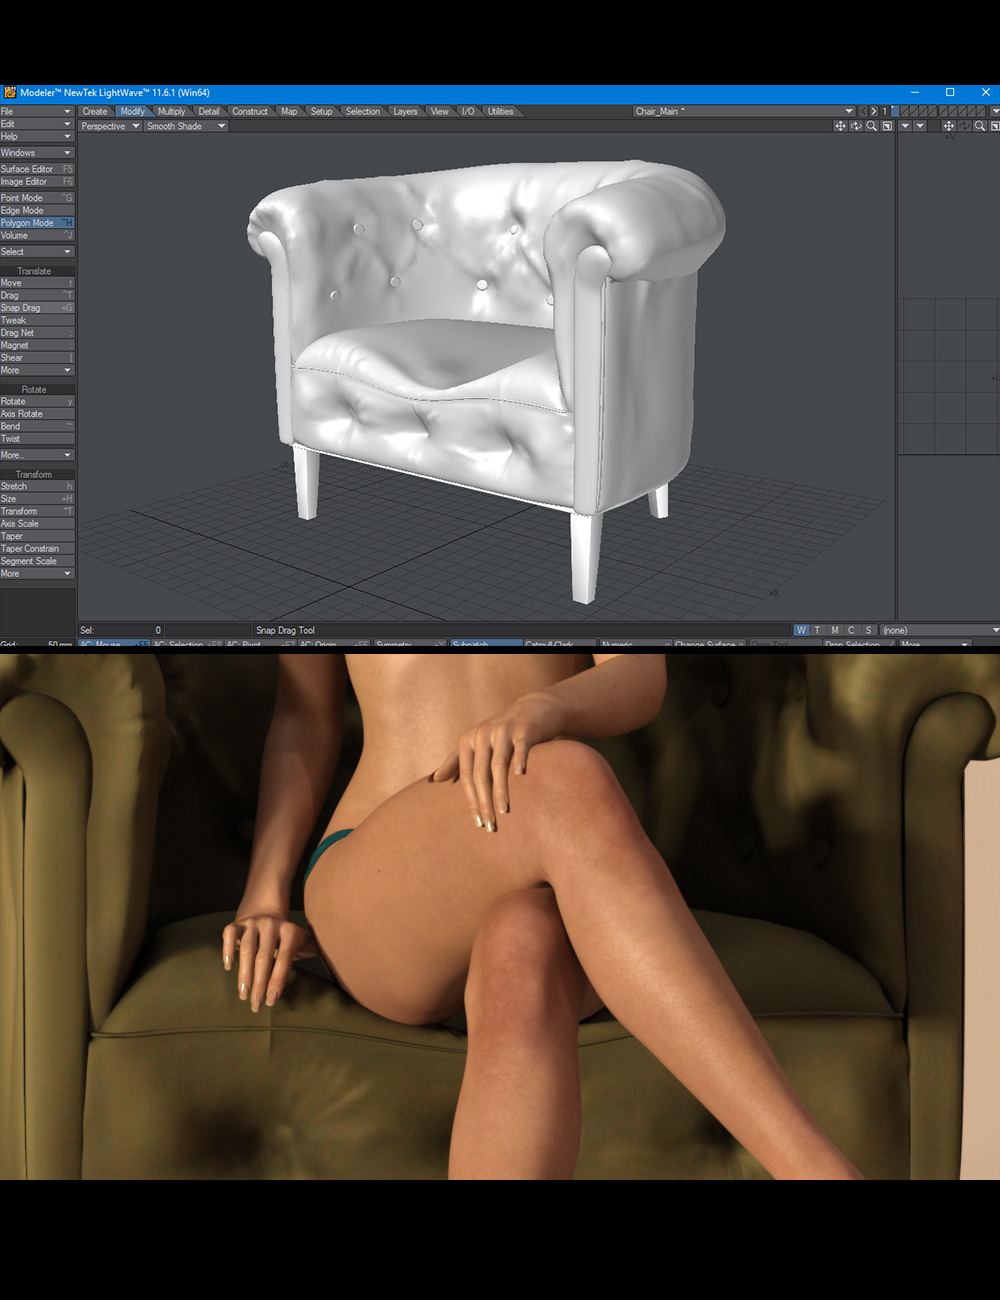 Create Your Own Sitting Morphs by: Dreamlight, 3D Models by Daz 3D